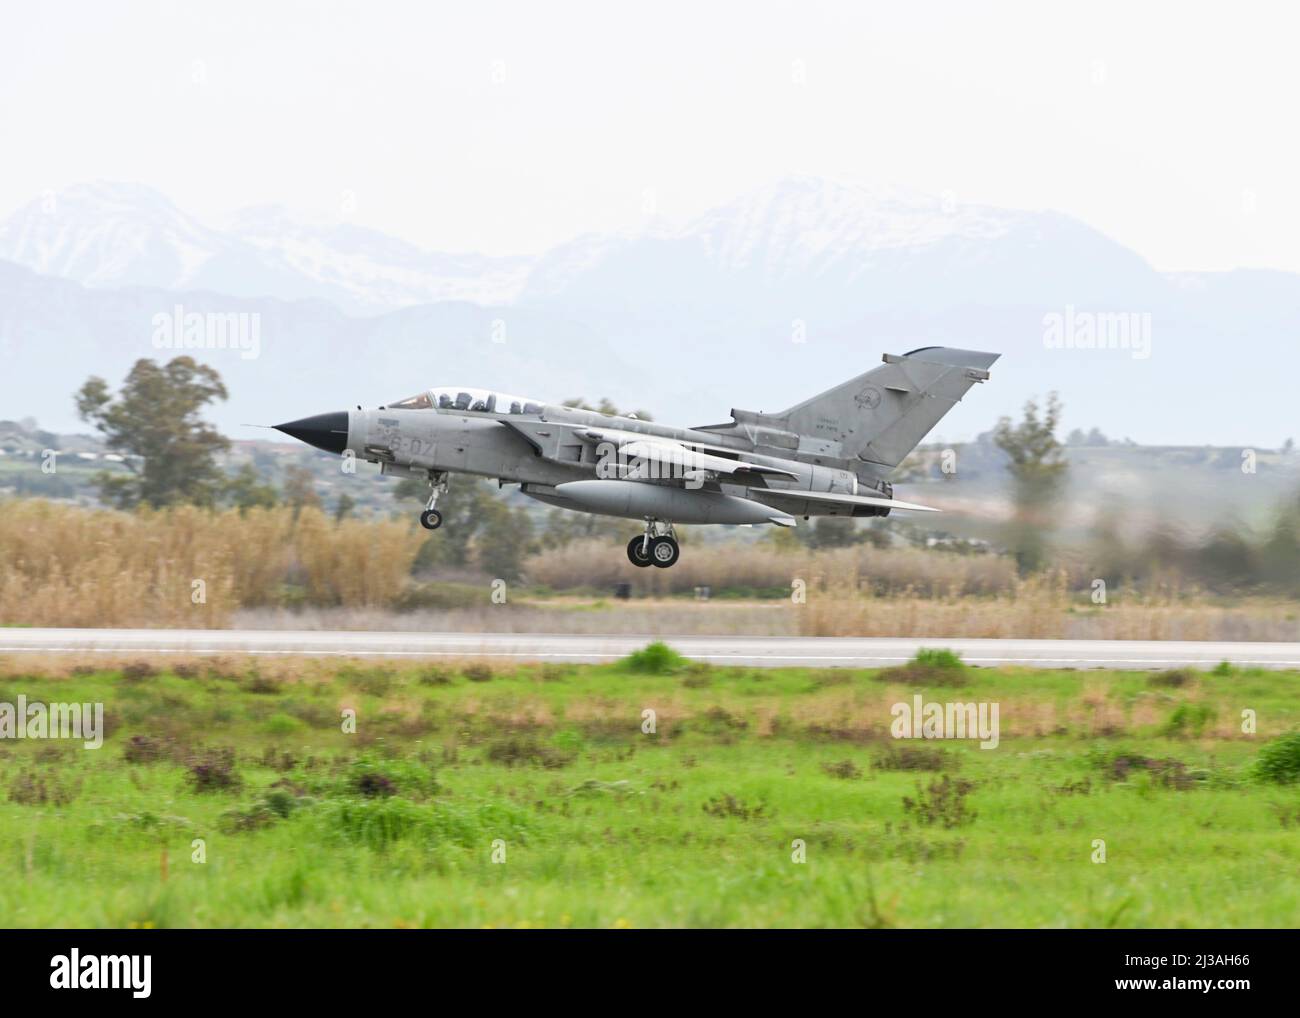 An Italian air force Tornado takes off from Andravida Air Base, Greece, April 4, 2022. Italy was one of the many nations that participated in INIOCHOS 22, a Hellenic air force-led operational and tactical level field training exercise, hosted by the Hellenic Air Tactics Center at Greece’s fighter weapons school. (U.S. Air Force photo by Staff Sgt. Malissa Lott) Stock Photo